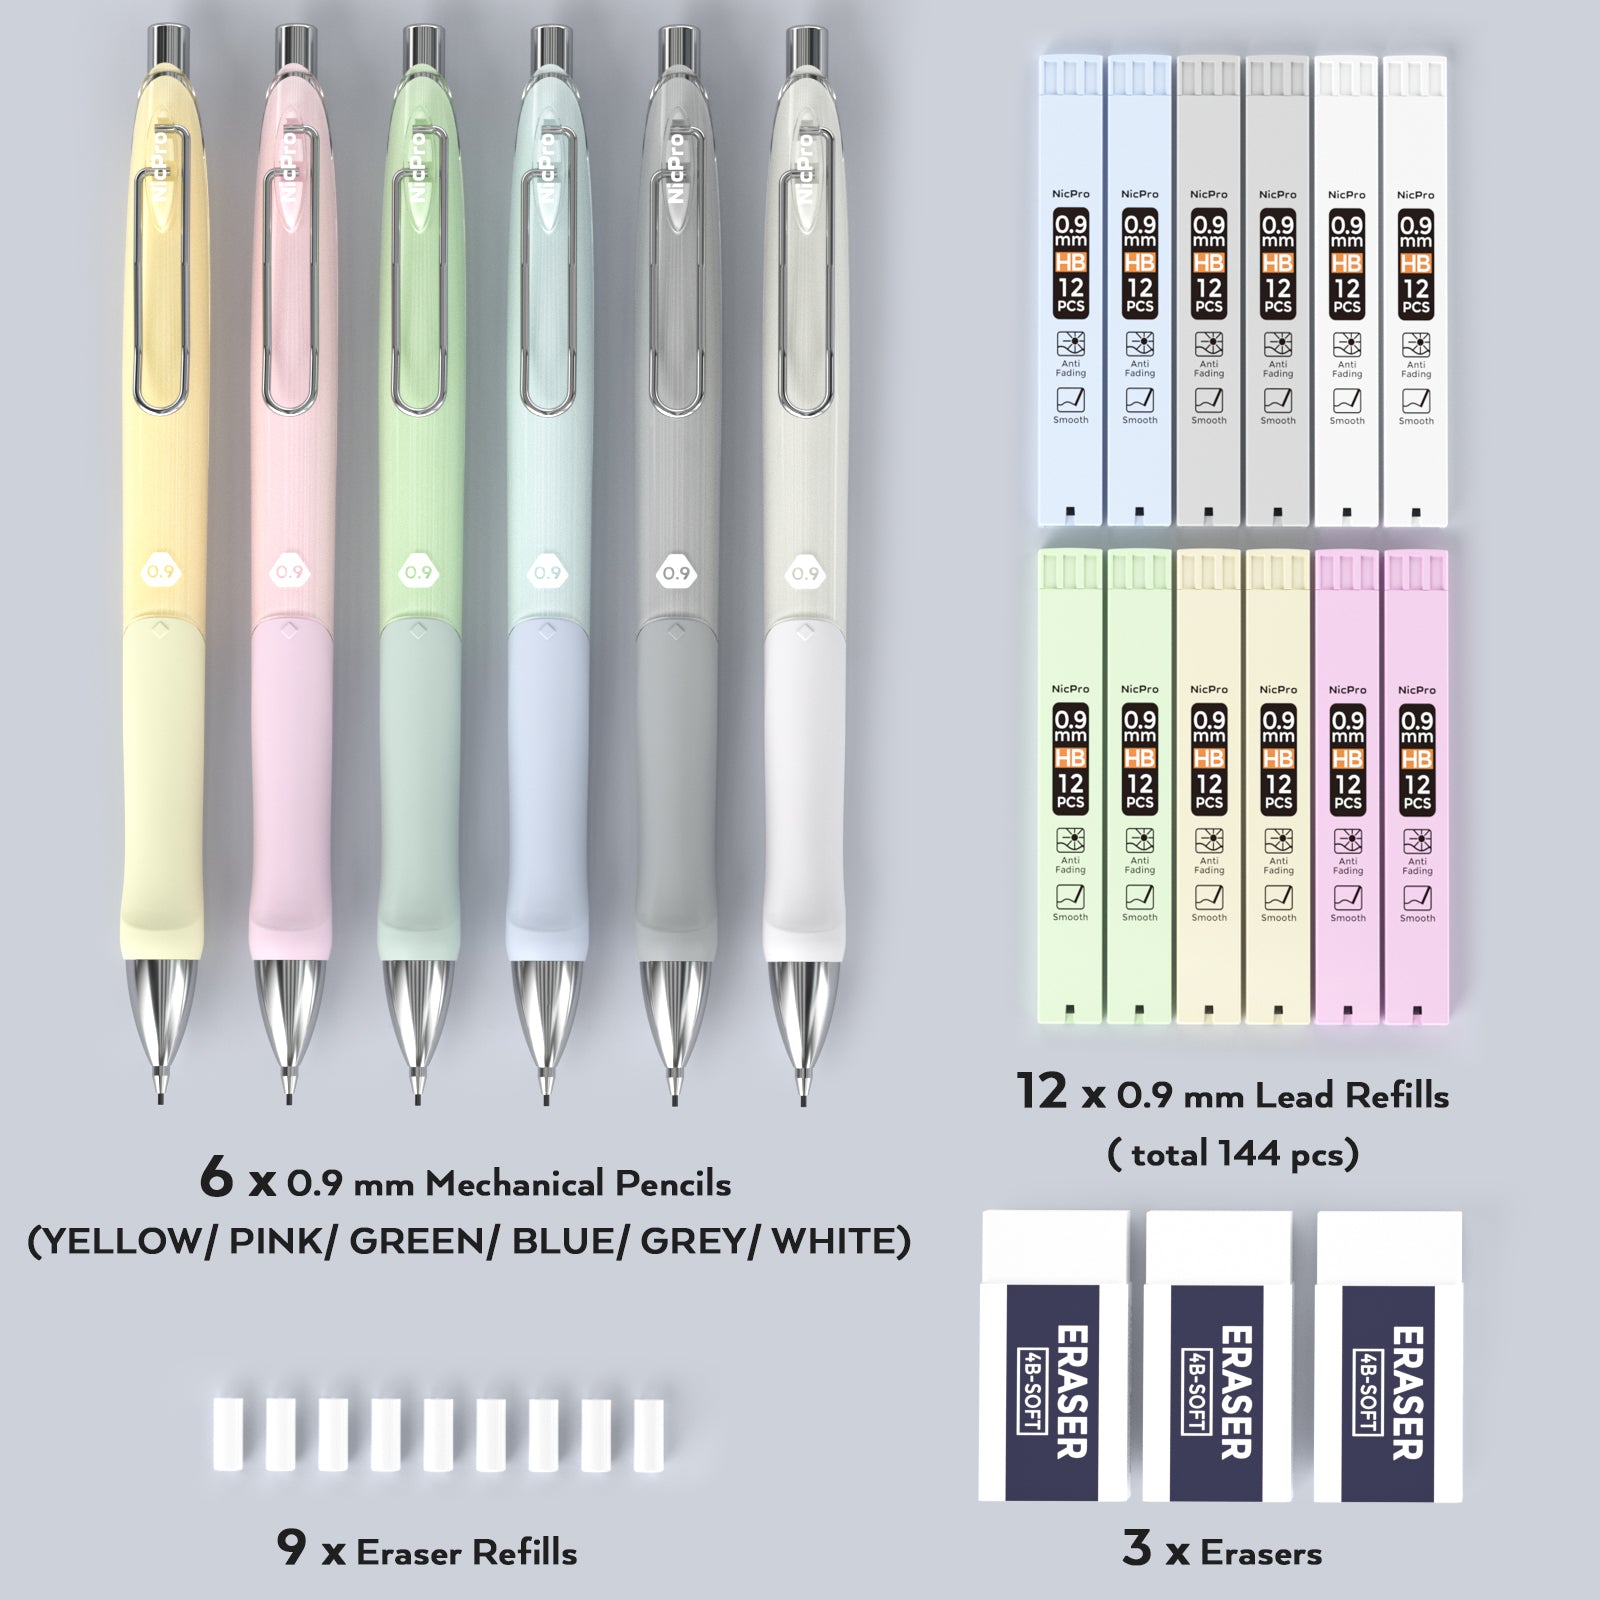 Nicpro 3PCS Pastel Mechanical Pencil Set, 0.7 mm with 6 Tubes HB Lead  Refills& 3PCS Eraser& 9PCS Eraser Refill for Student Writing, Drawing